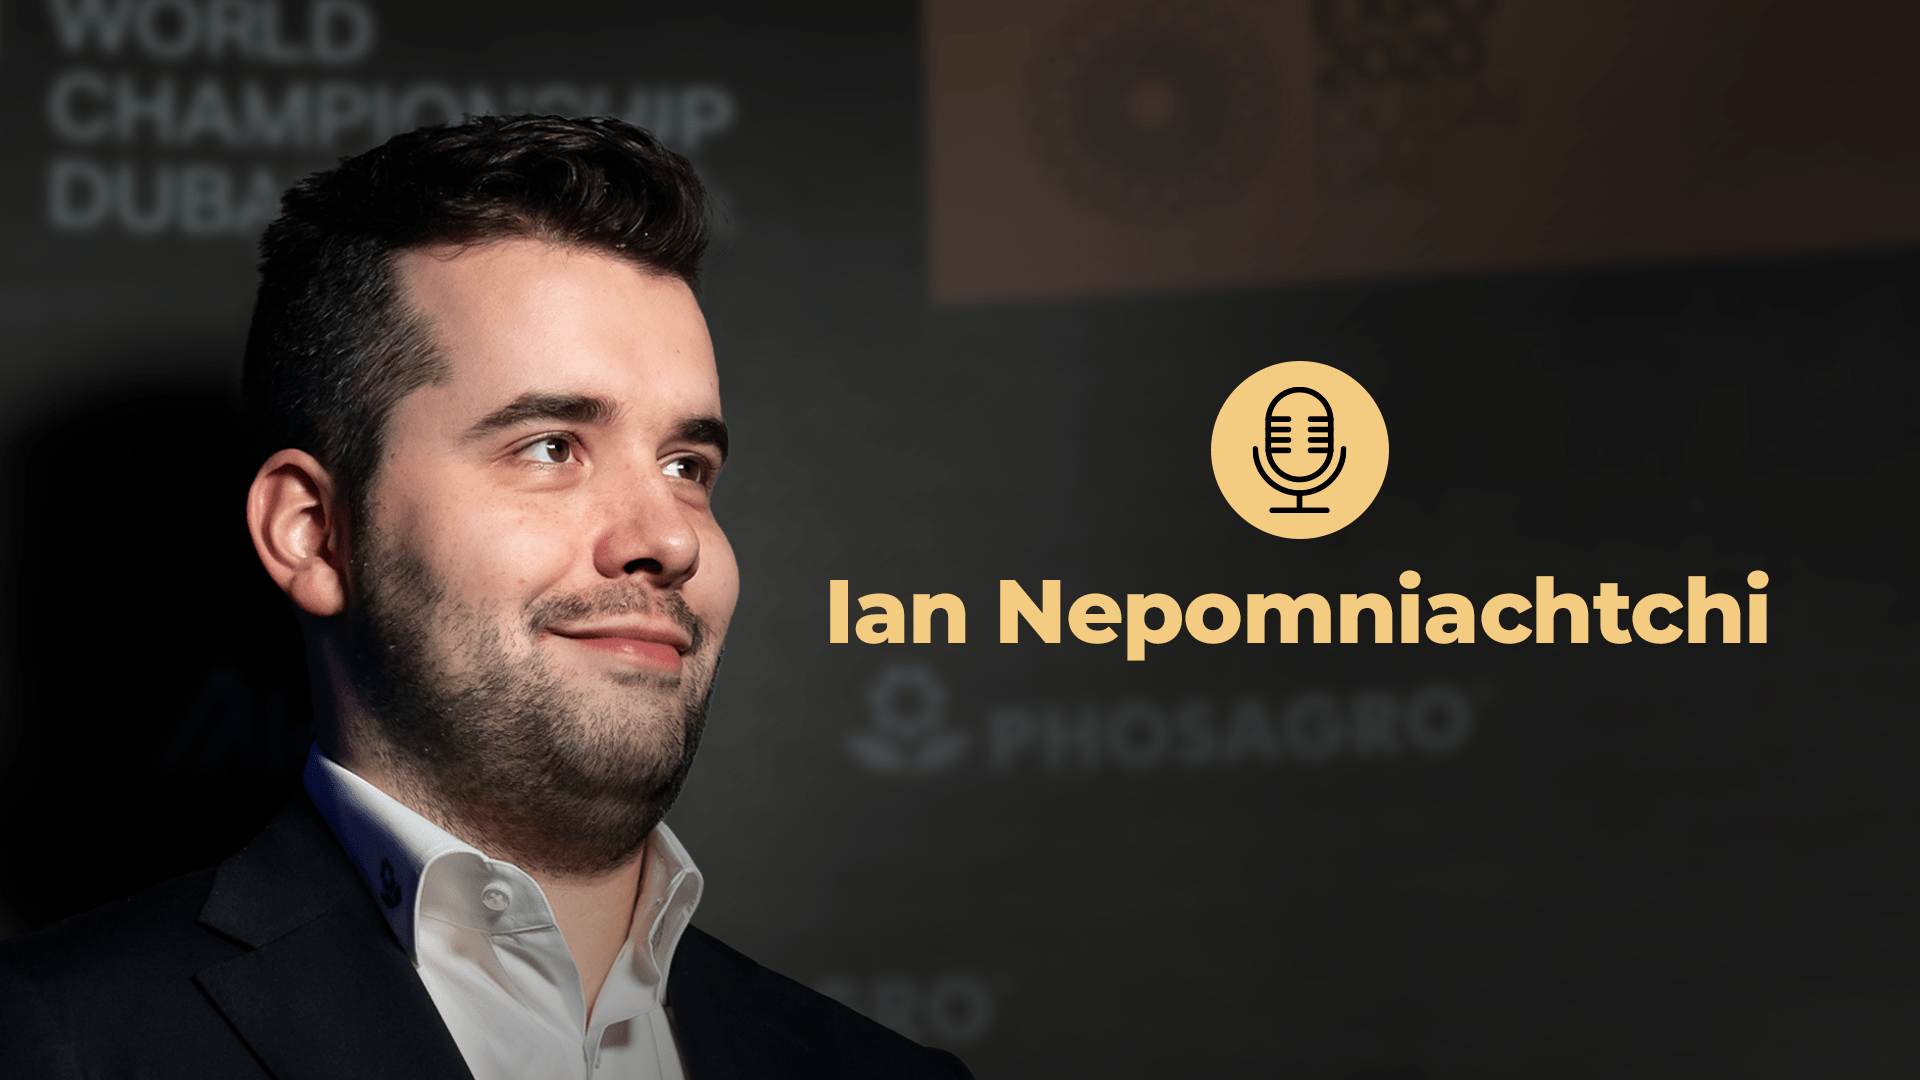 Ian Nepomniachtchi: Growing More Ambitious With My Goals